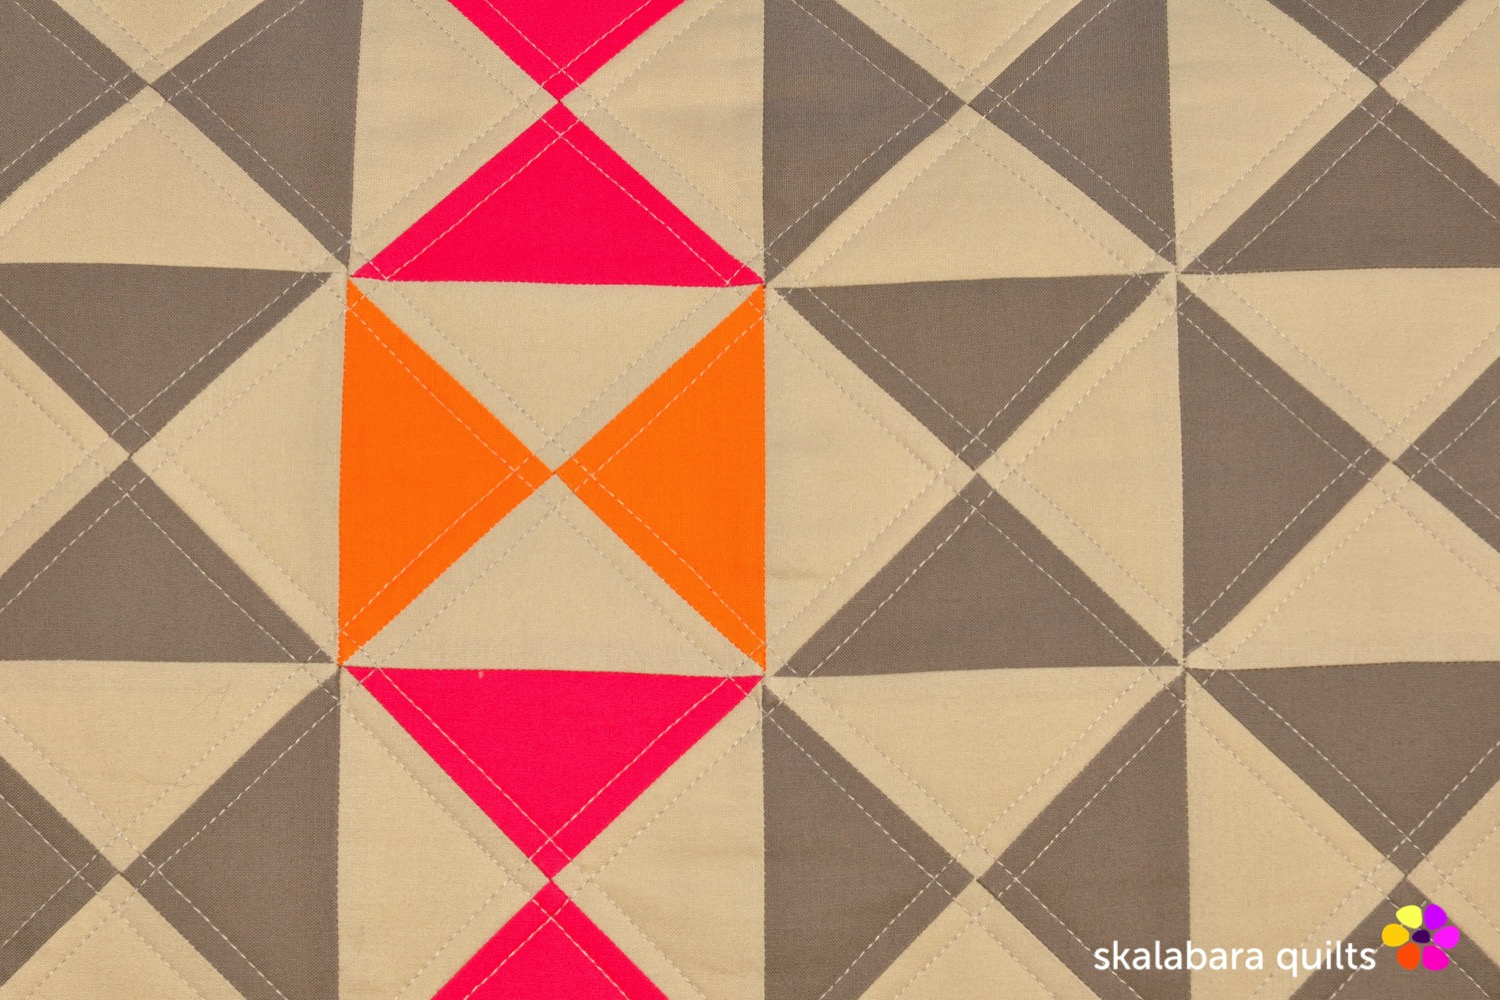 cushion cover hourglass detail 1 - skalabara quilts